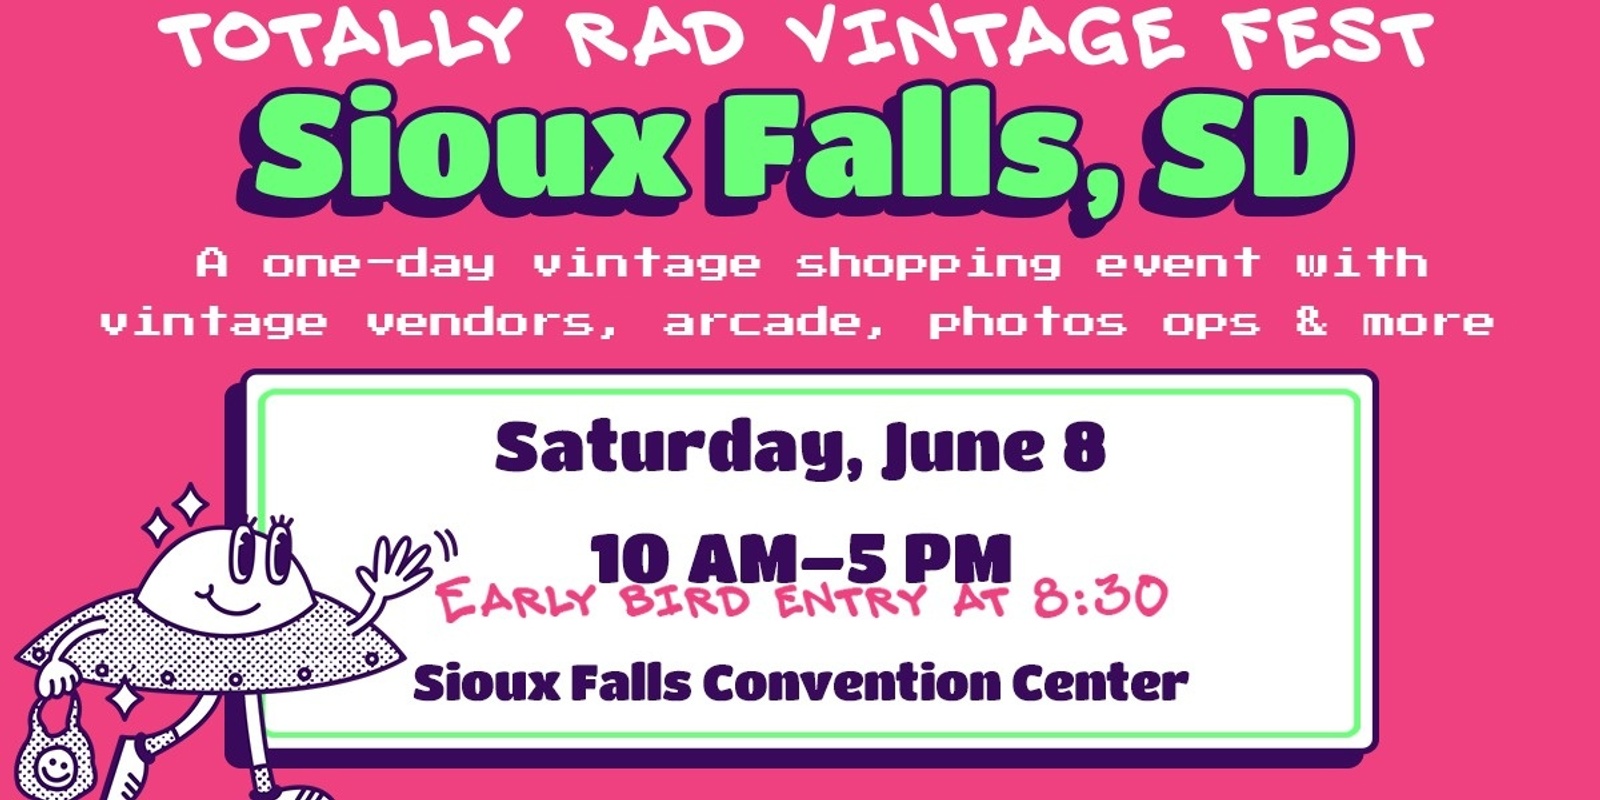 Banner image for Totally Rad Vintage Fest - Sioux Falls